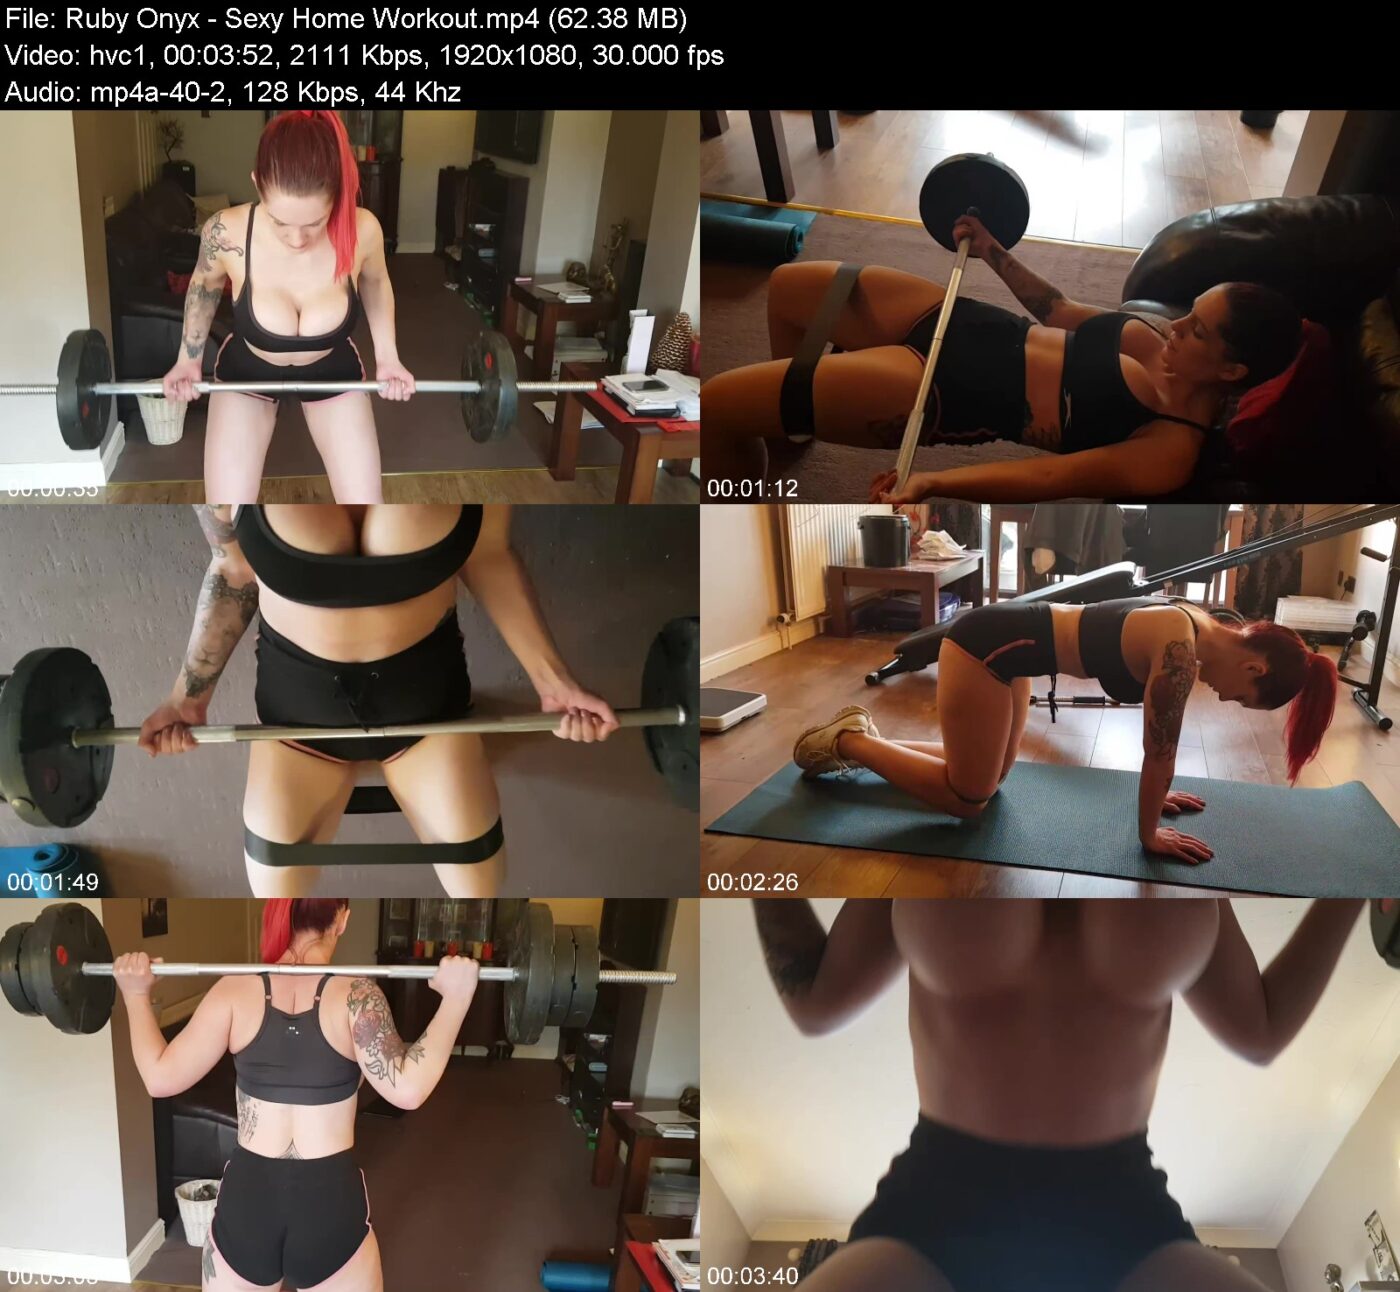 Ruby Onyx in Sexy Home Workout